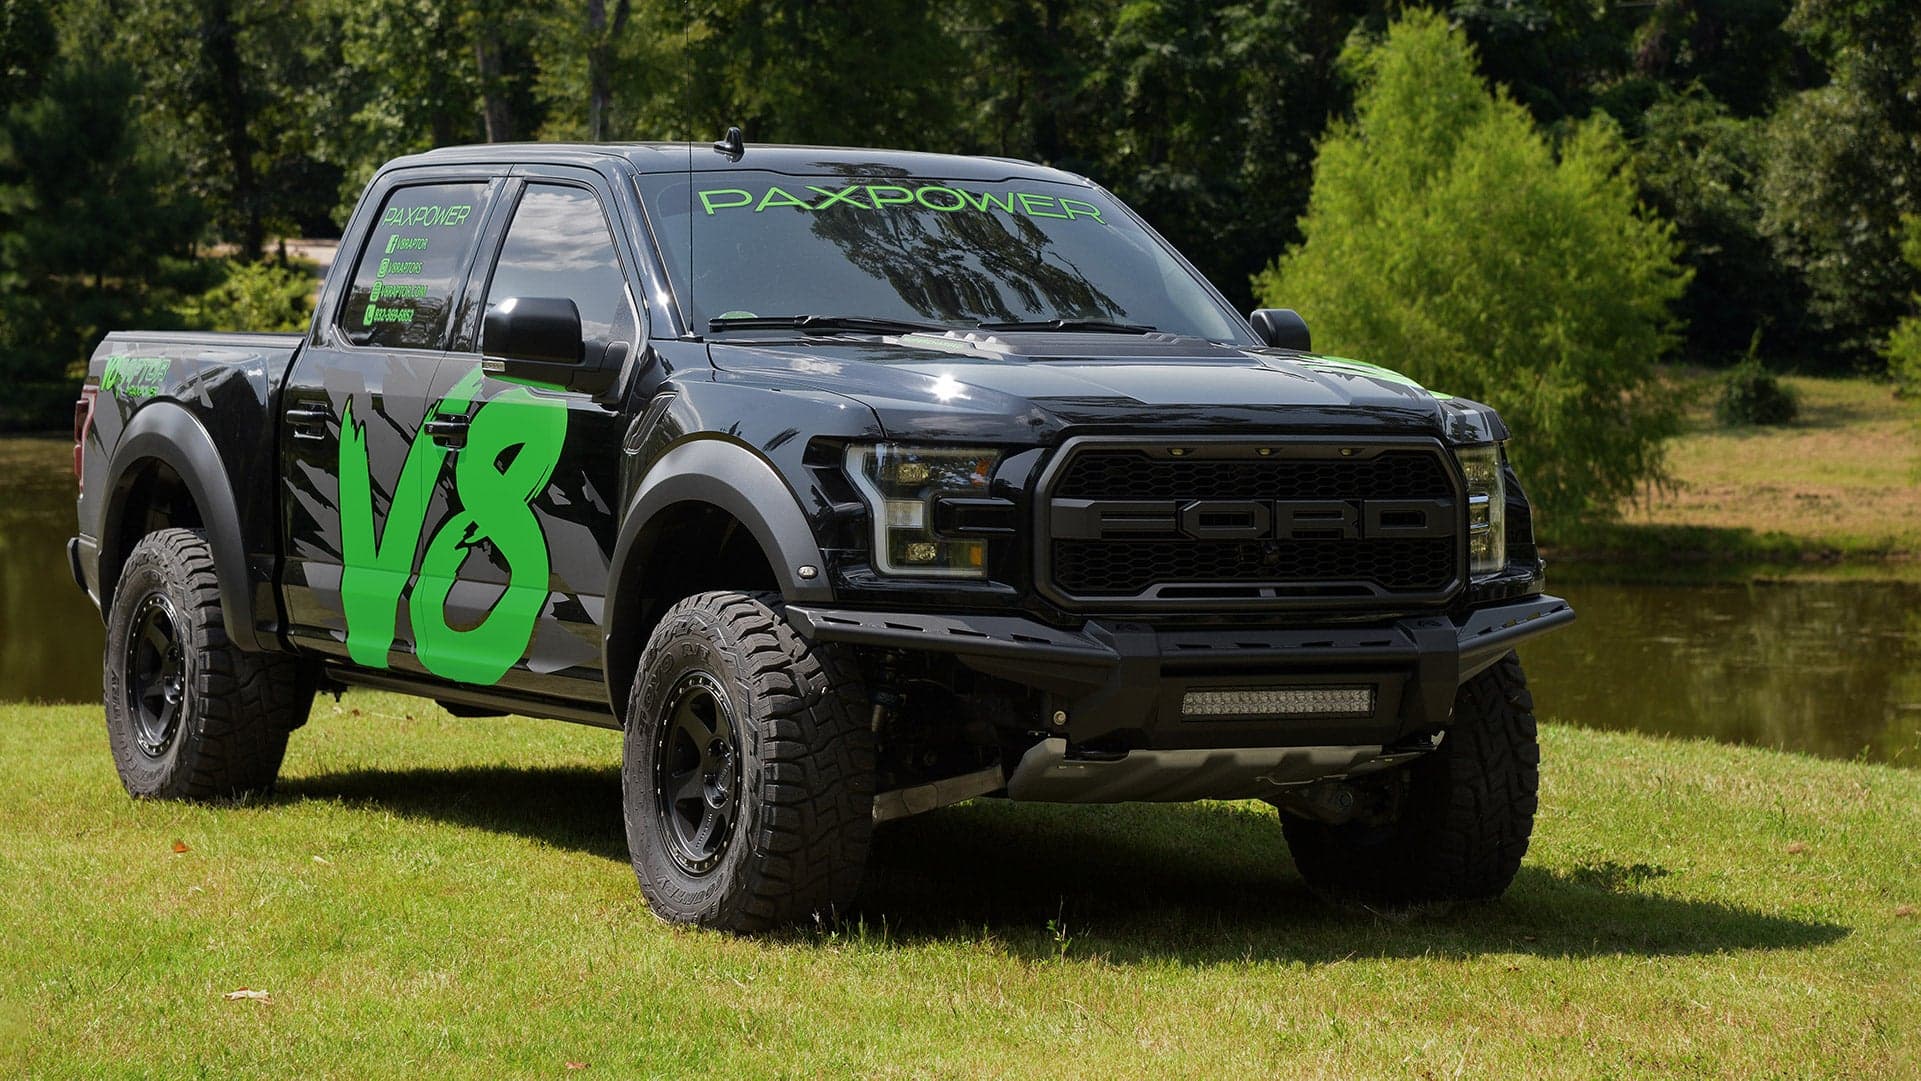 You Can Now Buy a V8 or Diesel-Powered Ford F-150 Raptor Pickup Truck, Because America